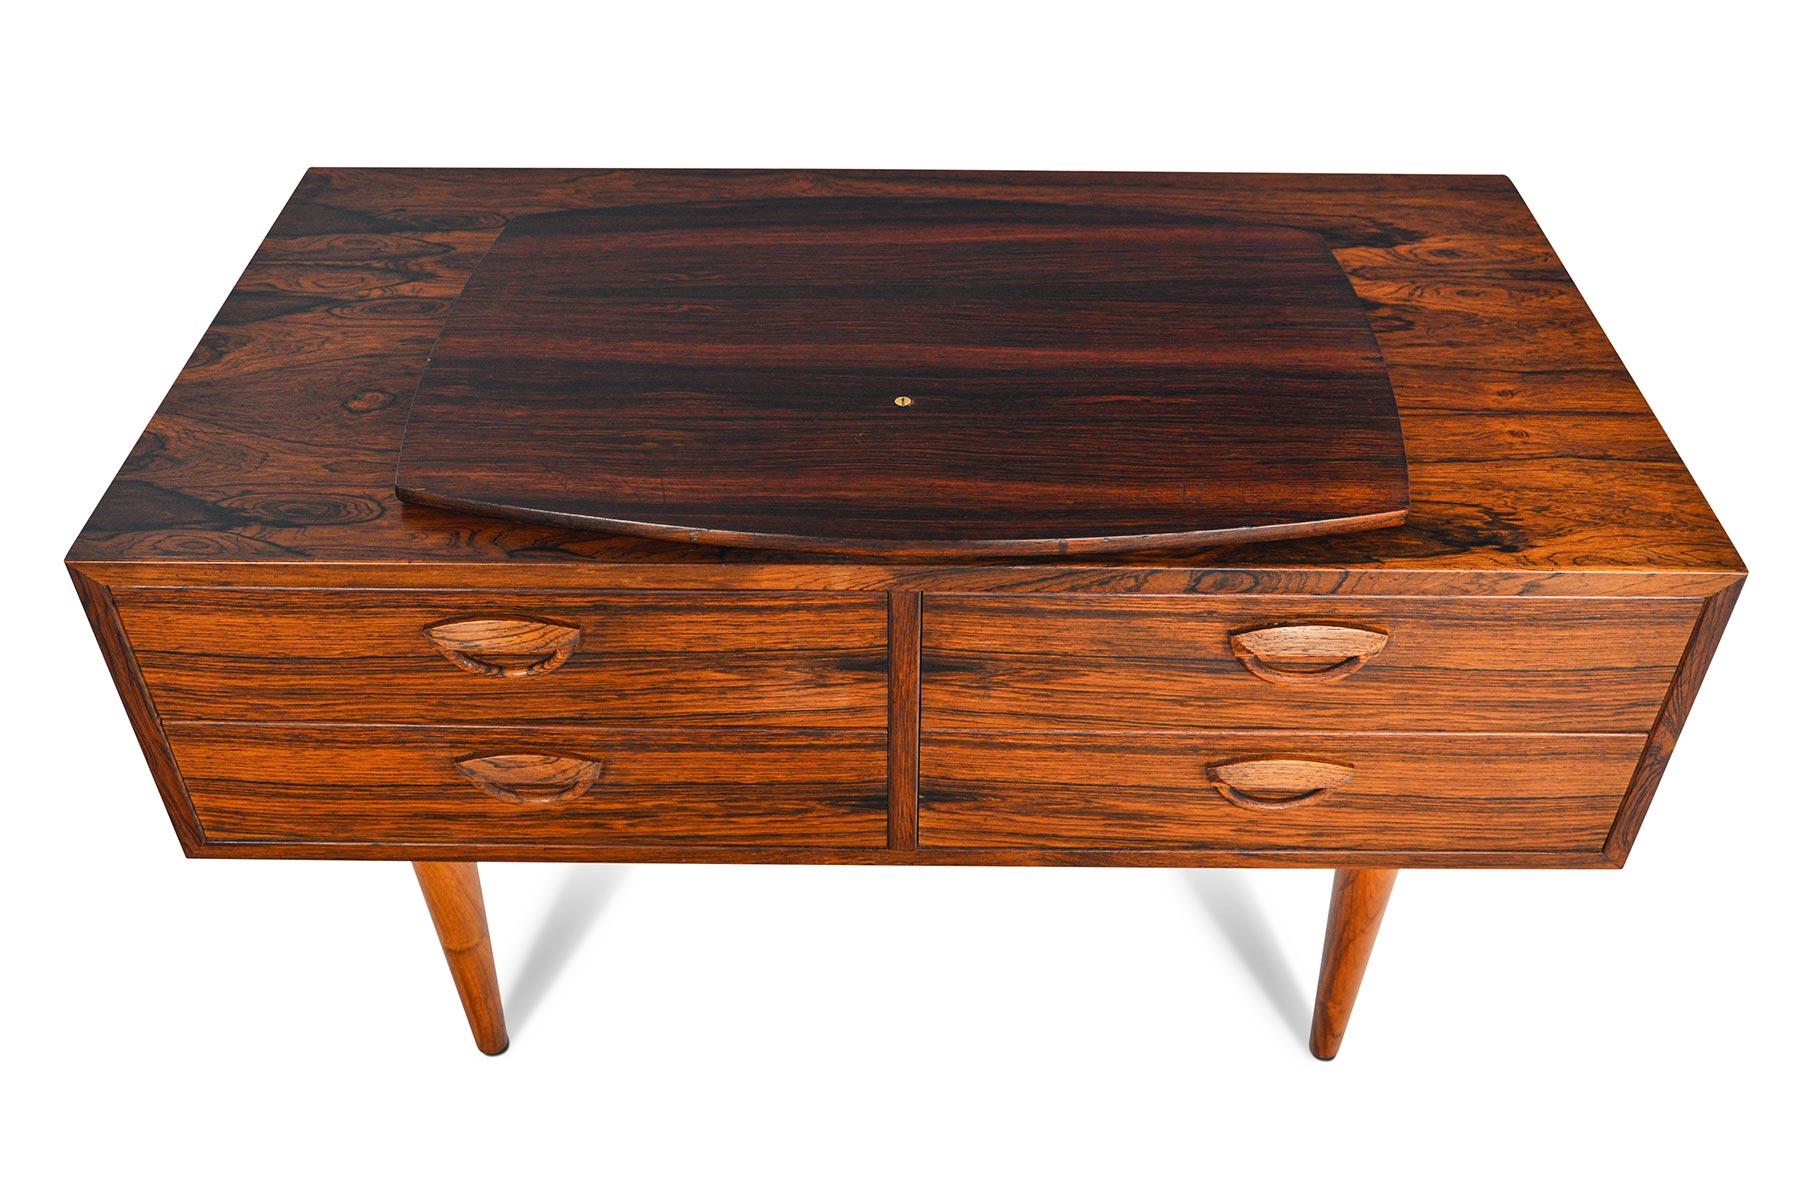 This Danish modern chest was designed as Model 50 in 1958 by Kai Kristiansen for Feldballes Møbelfabrik. The chest features a swivel rosewood lazy, Susan that offer 360° of movement. The only thing more striking than the designer’s signature pulls